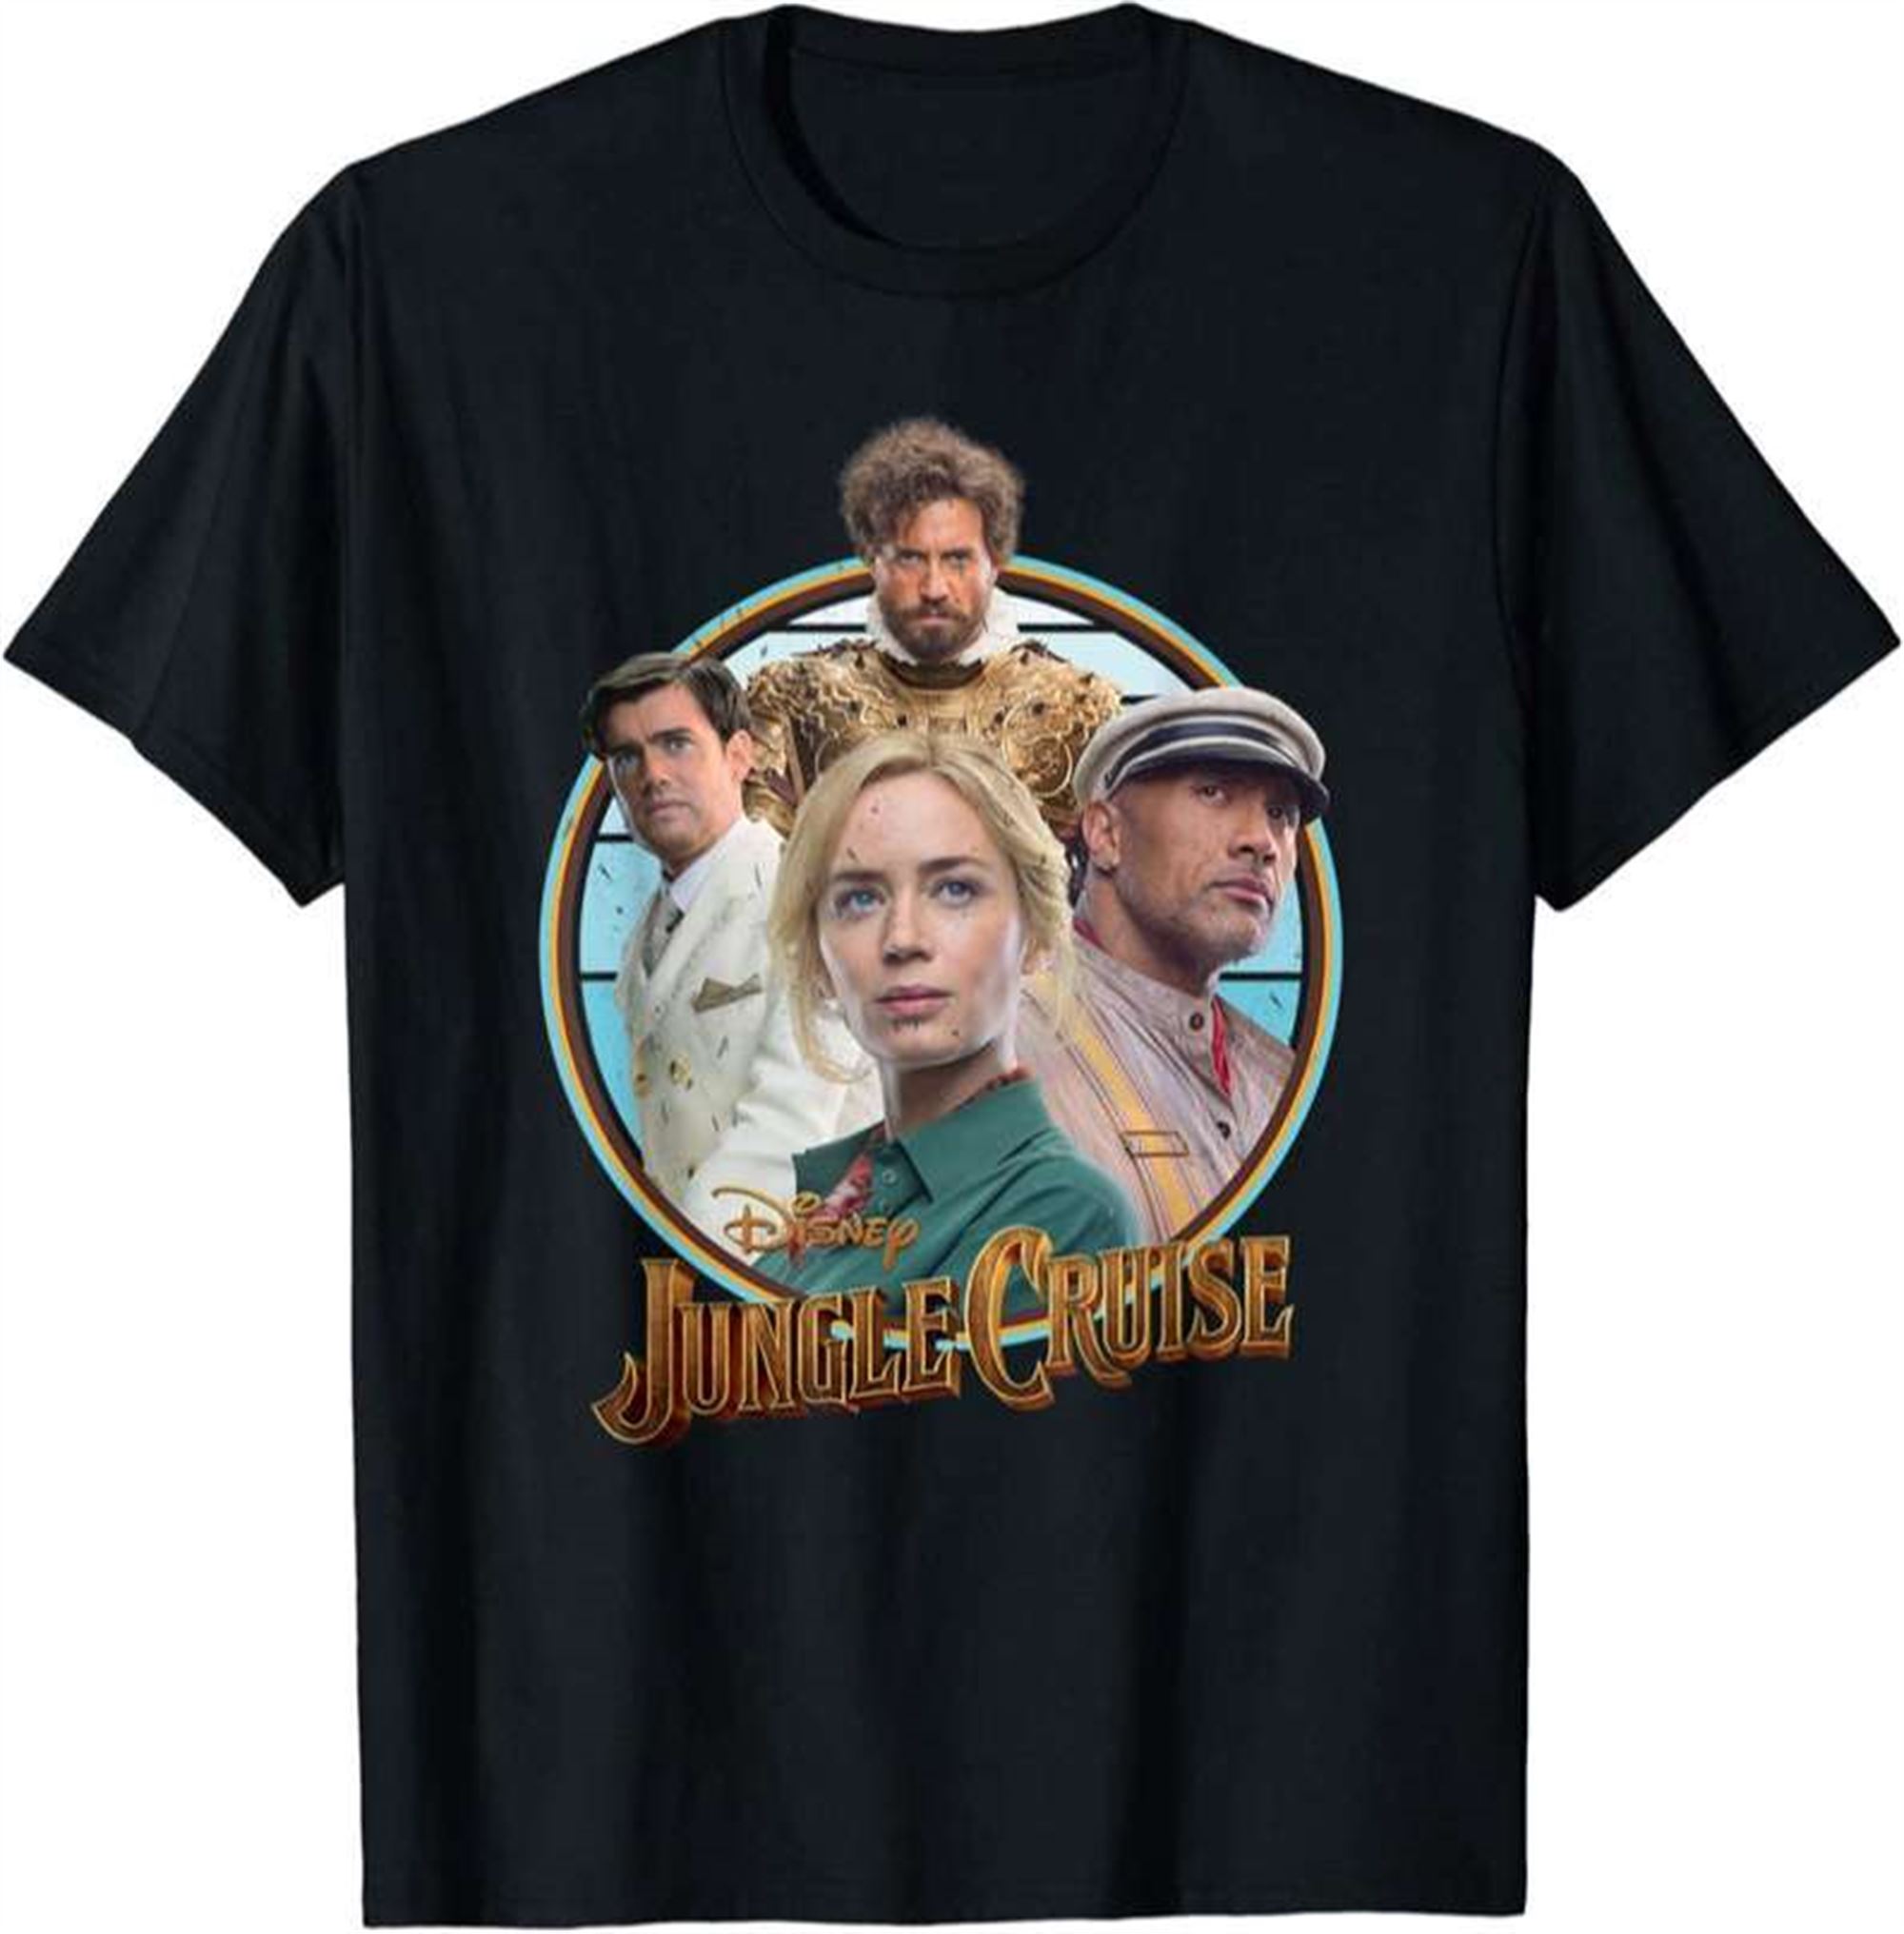 Jungle Cruise Characters And Movie T Shirt Full Size Up To 5xl